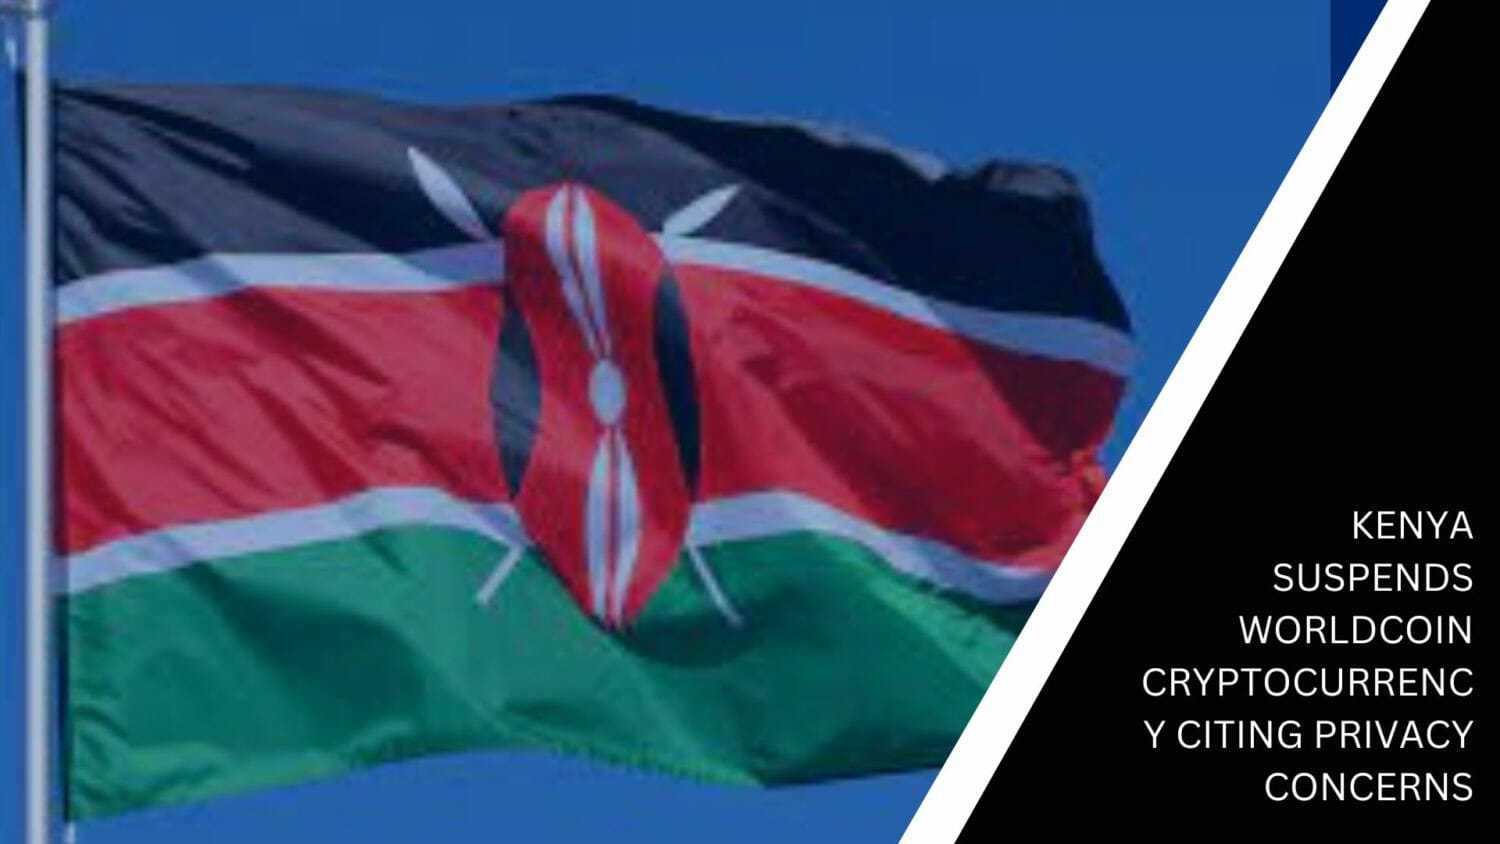 Kenya Suspends Worldcoin Cryptocurrency Citing Privacy Concerns